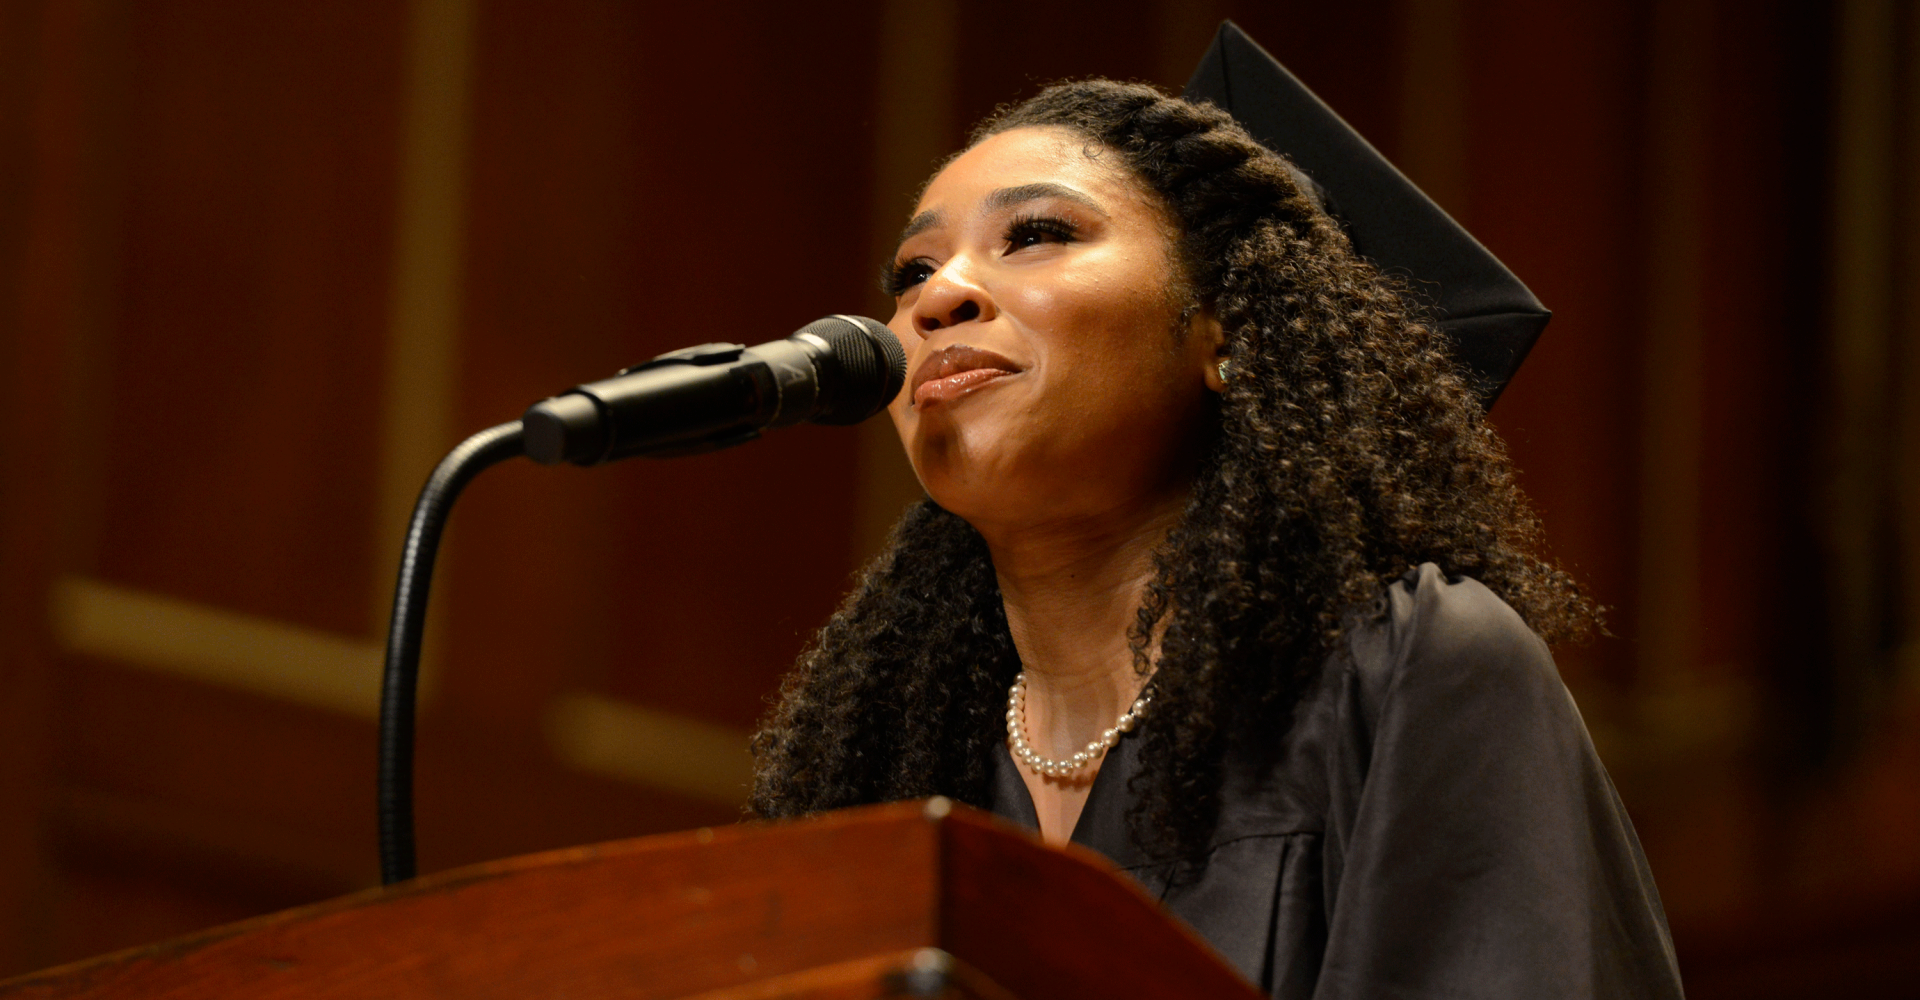 Darynn Dean stands at a podium wearing a graduation cap and gown. She smiles and looks into the distance while speaking into a microphone.